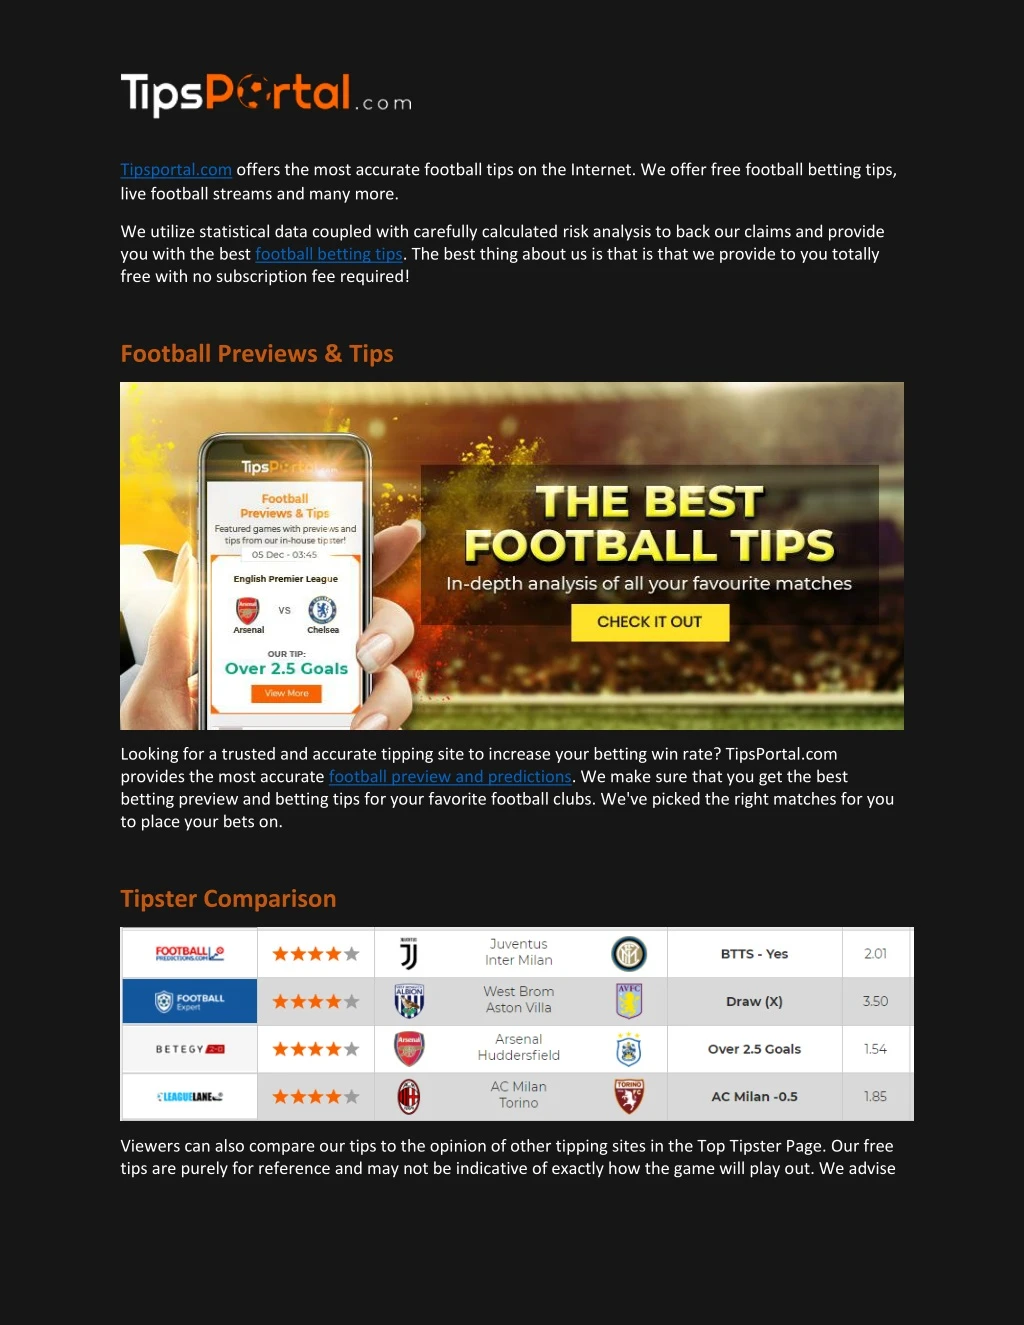 tipsportal com offers the most accurate football